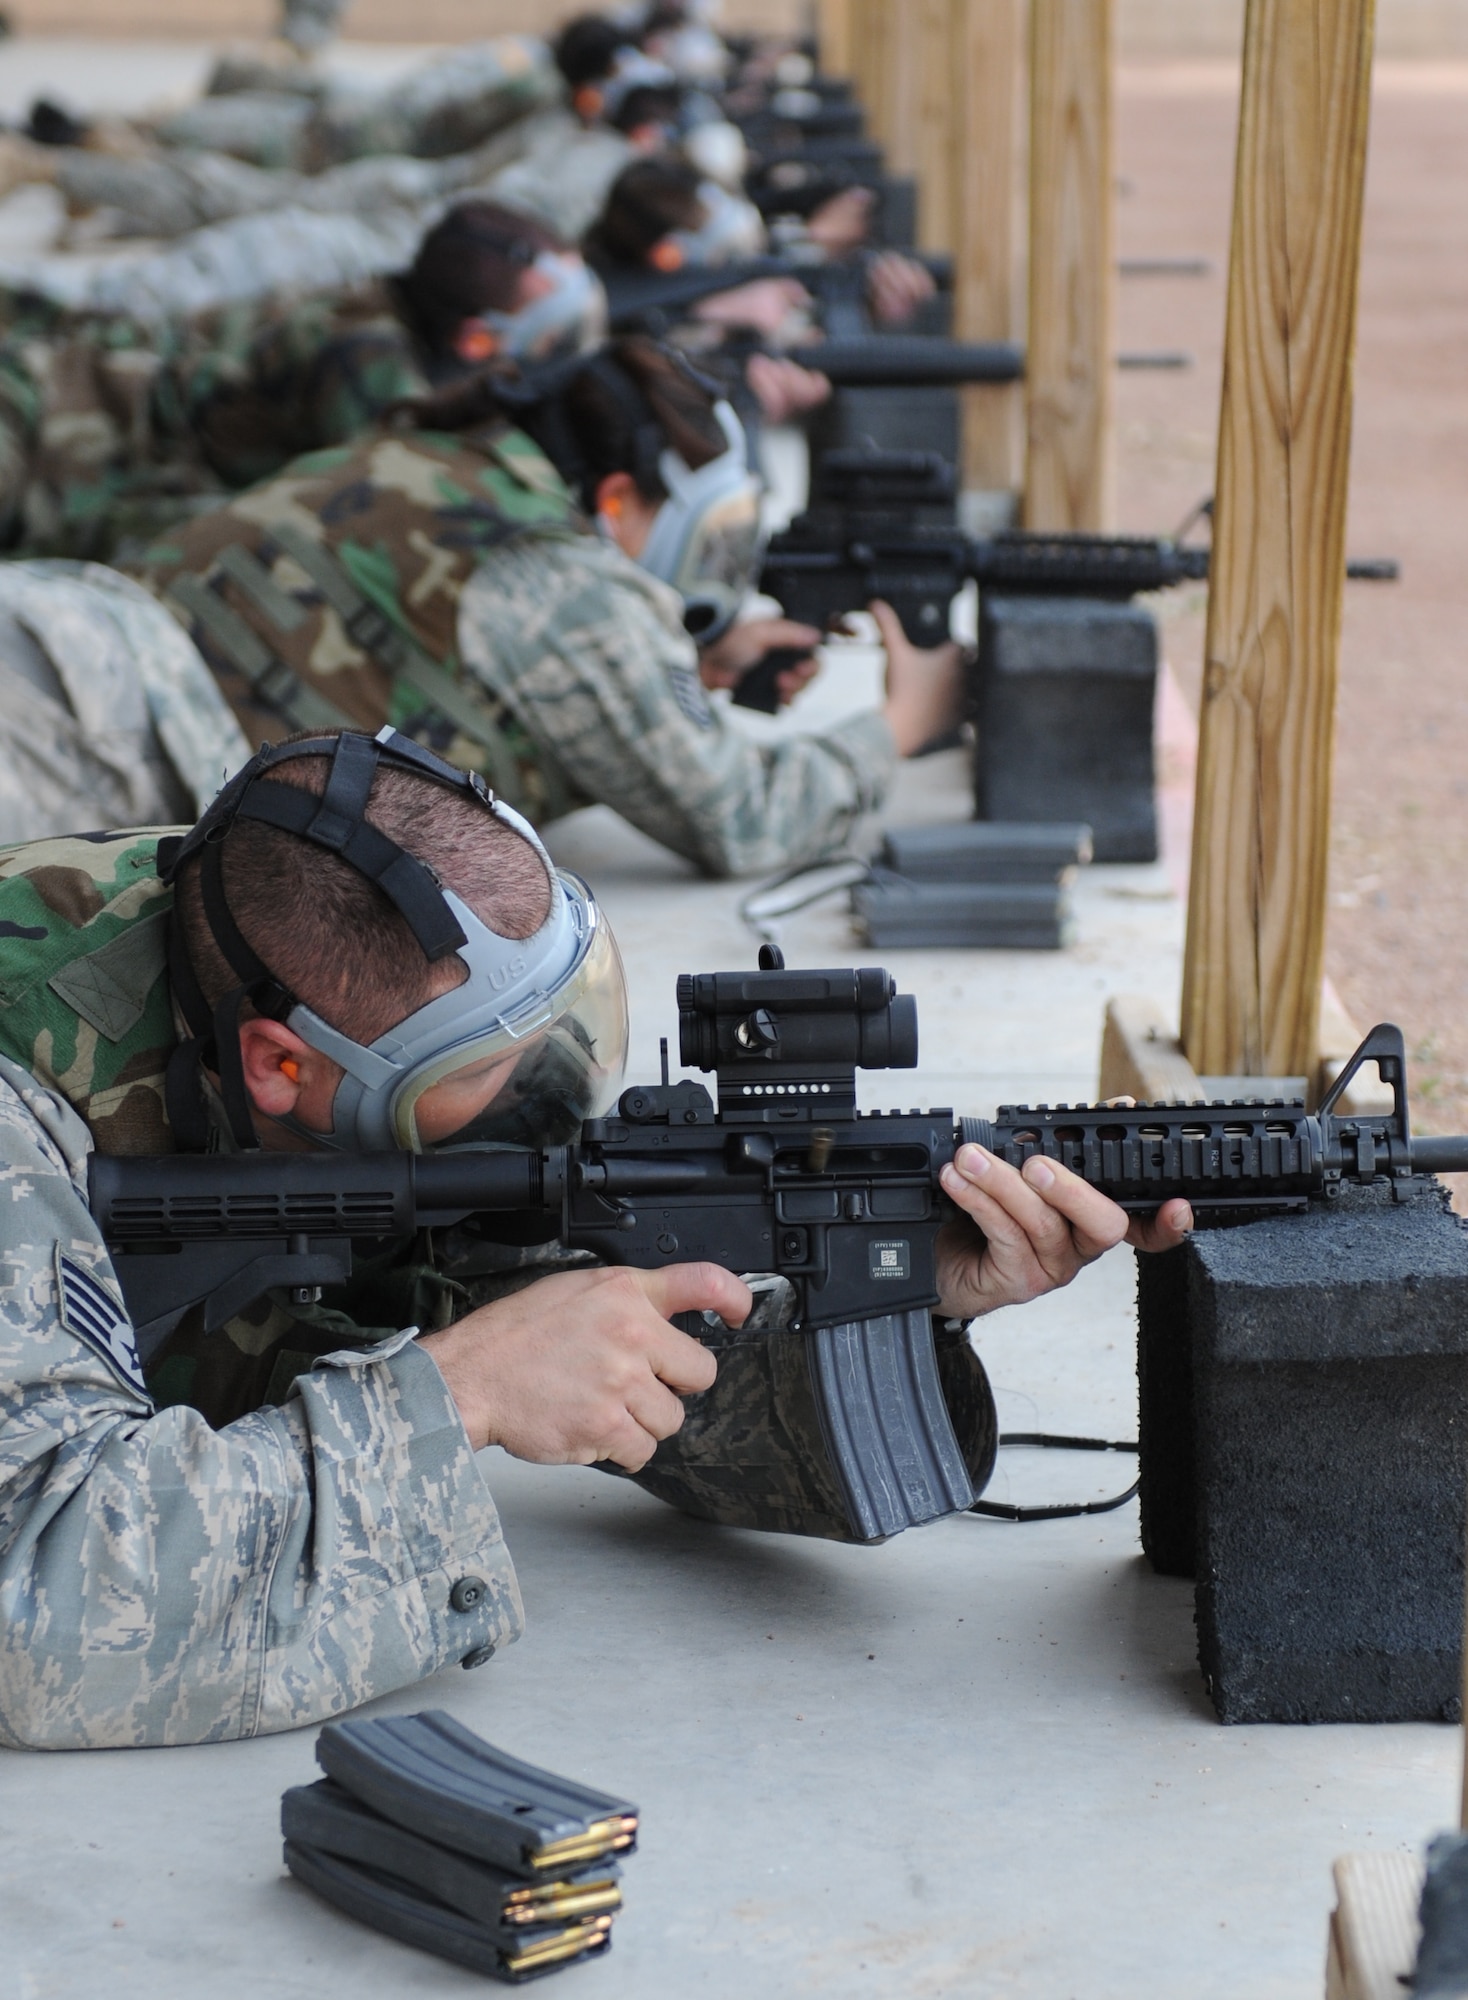 Airmen fire at the Combat Arms Training and Mainenance (CATM) range at Holloman Air Force Base, N.M., Jan. 22. The training that Airmen recieve at Holloman's CATM ensures everyone is capable and confident with handling their weapon. (U.S. Air Force photo/Senior Airman Michael Means) 